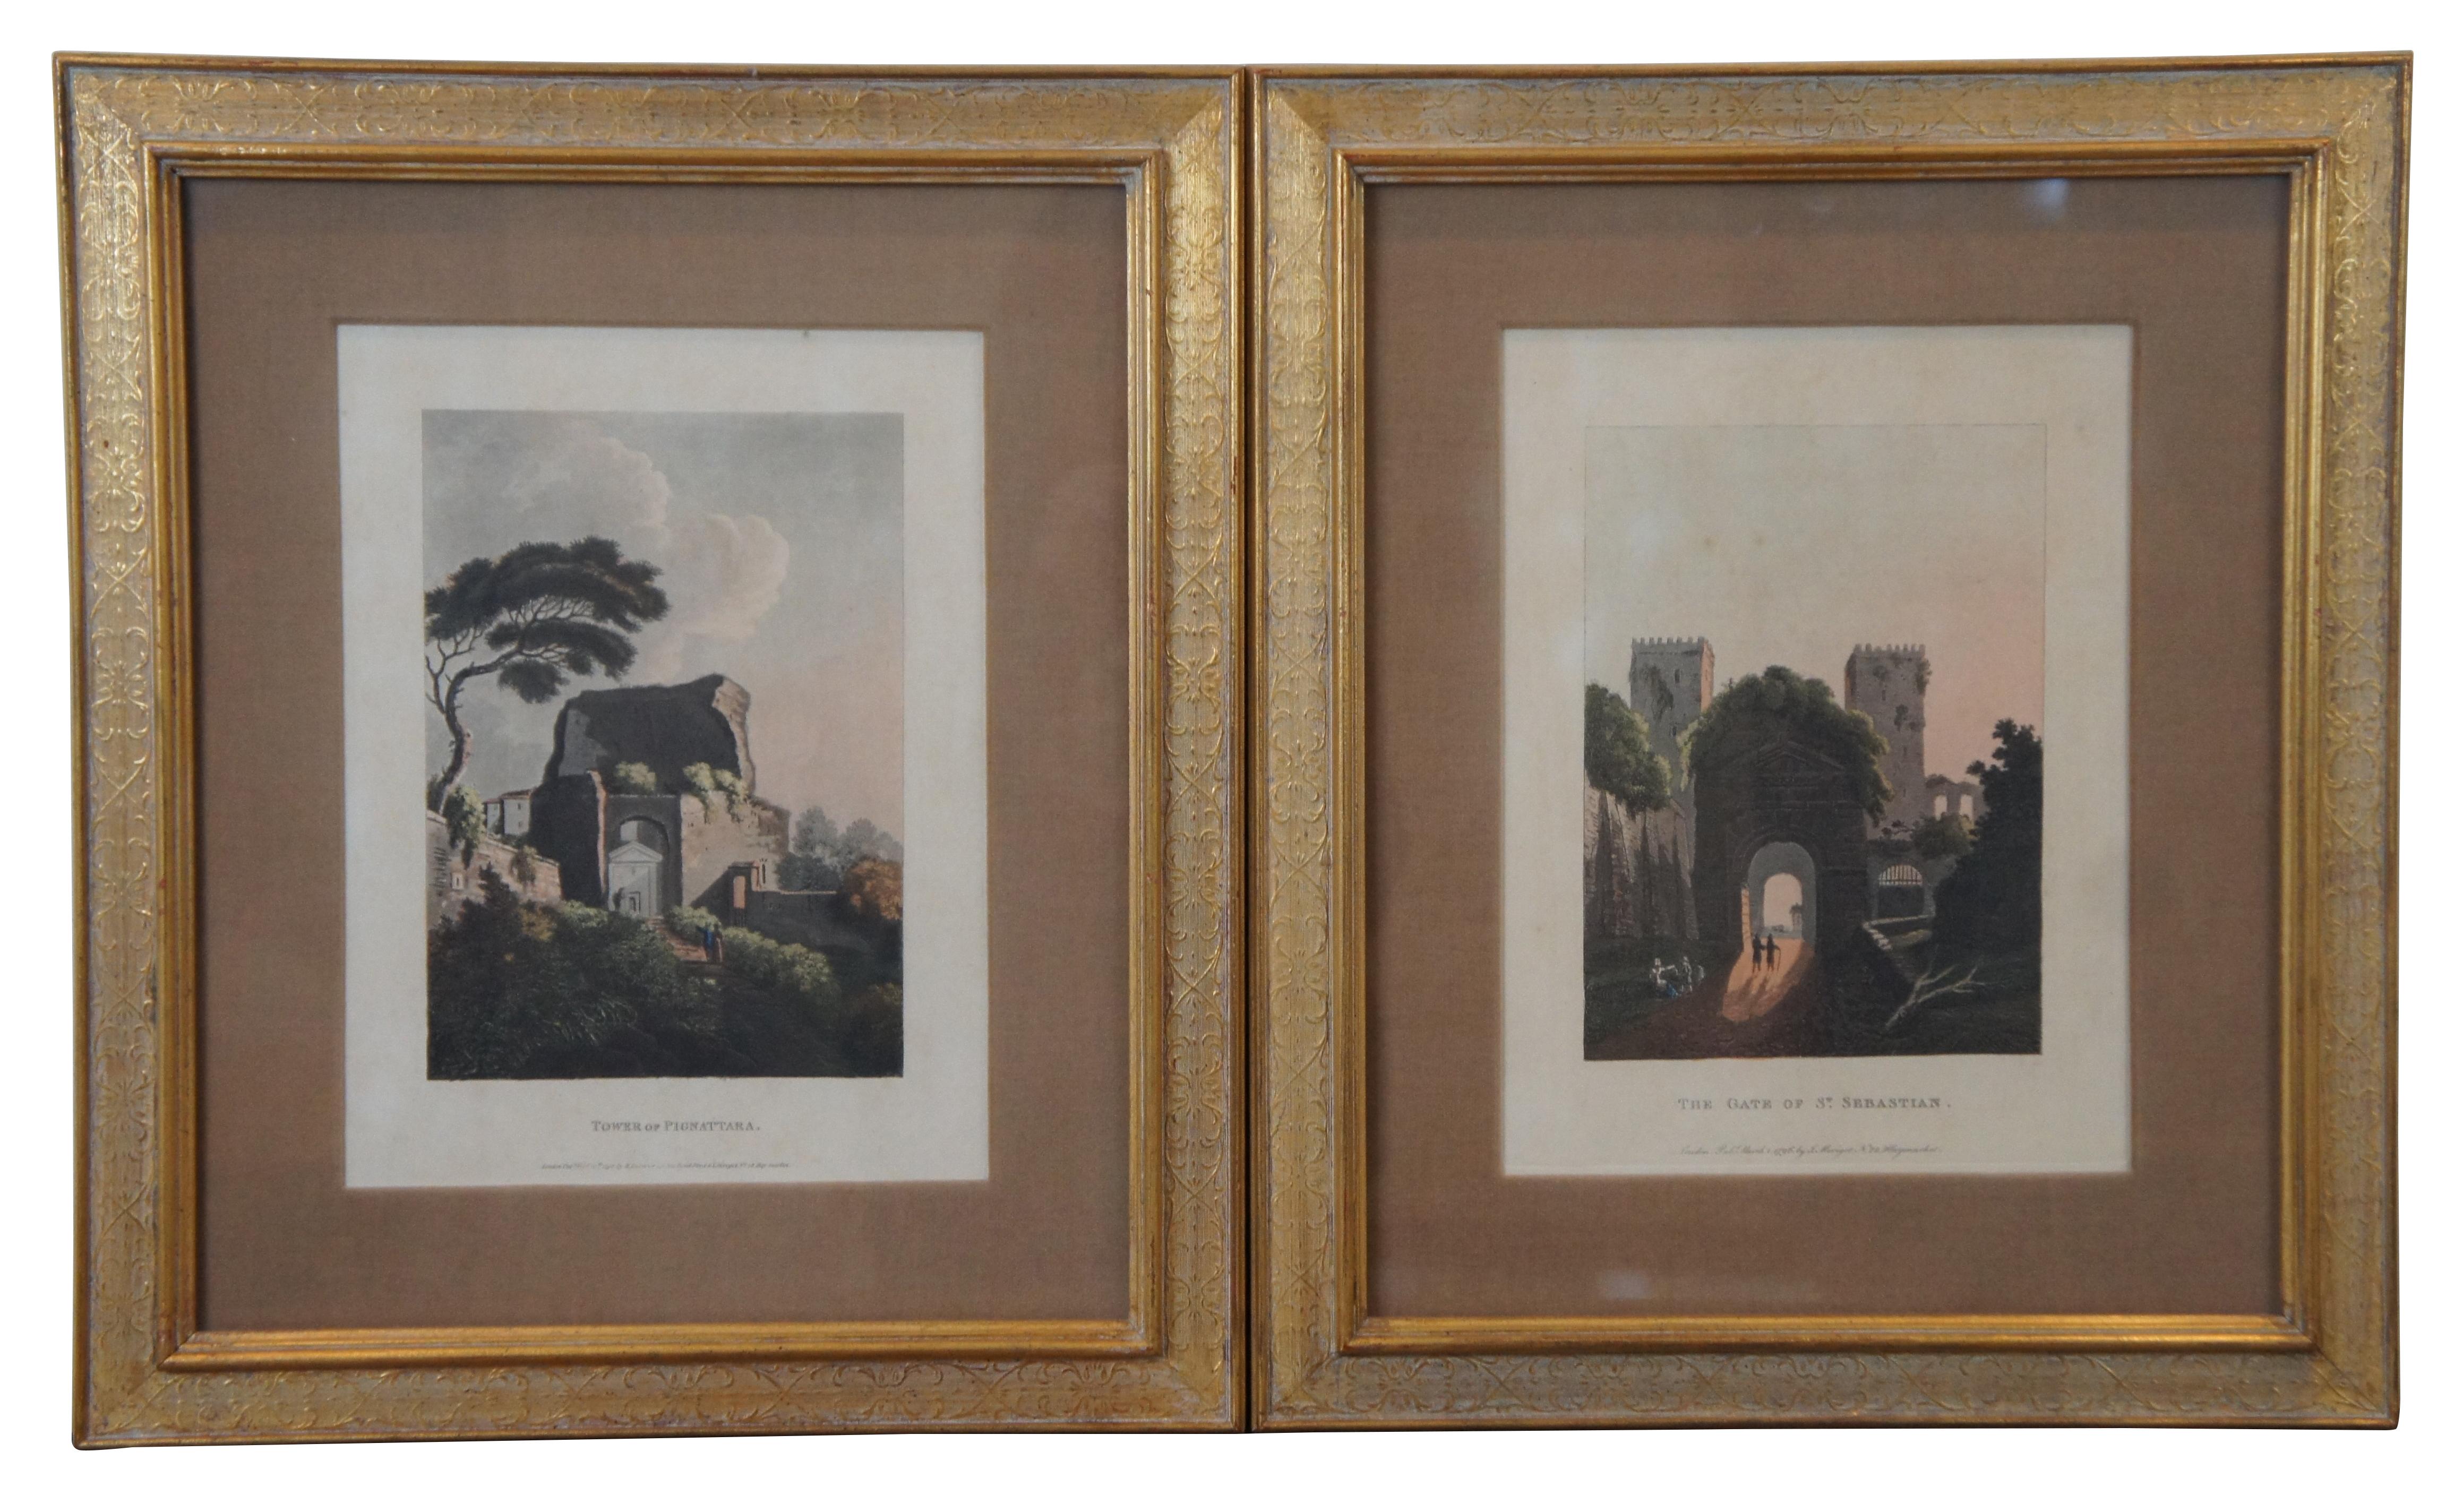 Set of four late 18th century hand colored engraving - “The Gate of St. Sebastian” published 1796 by James Merigot, “Tower of Pignattara” published 1798 by R. E(illegible), “Temple of Minerva Medica” publisher information faded away, and “The Arch